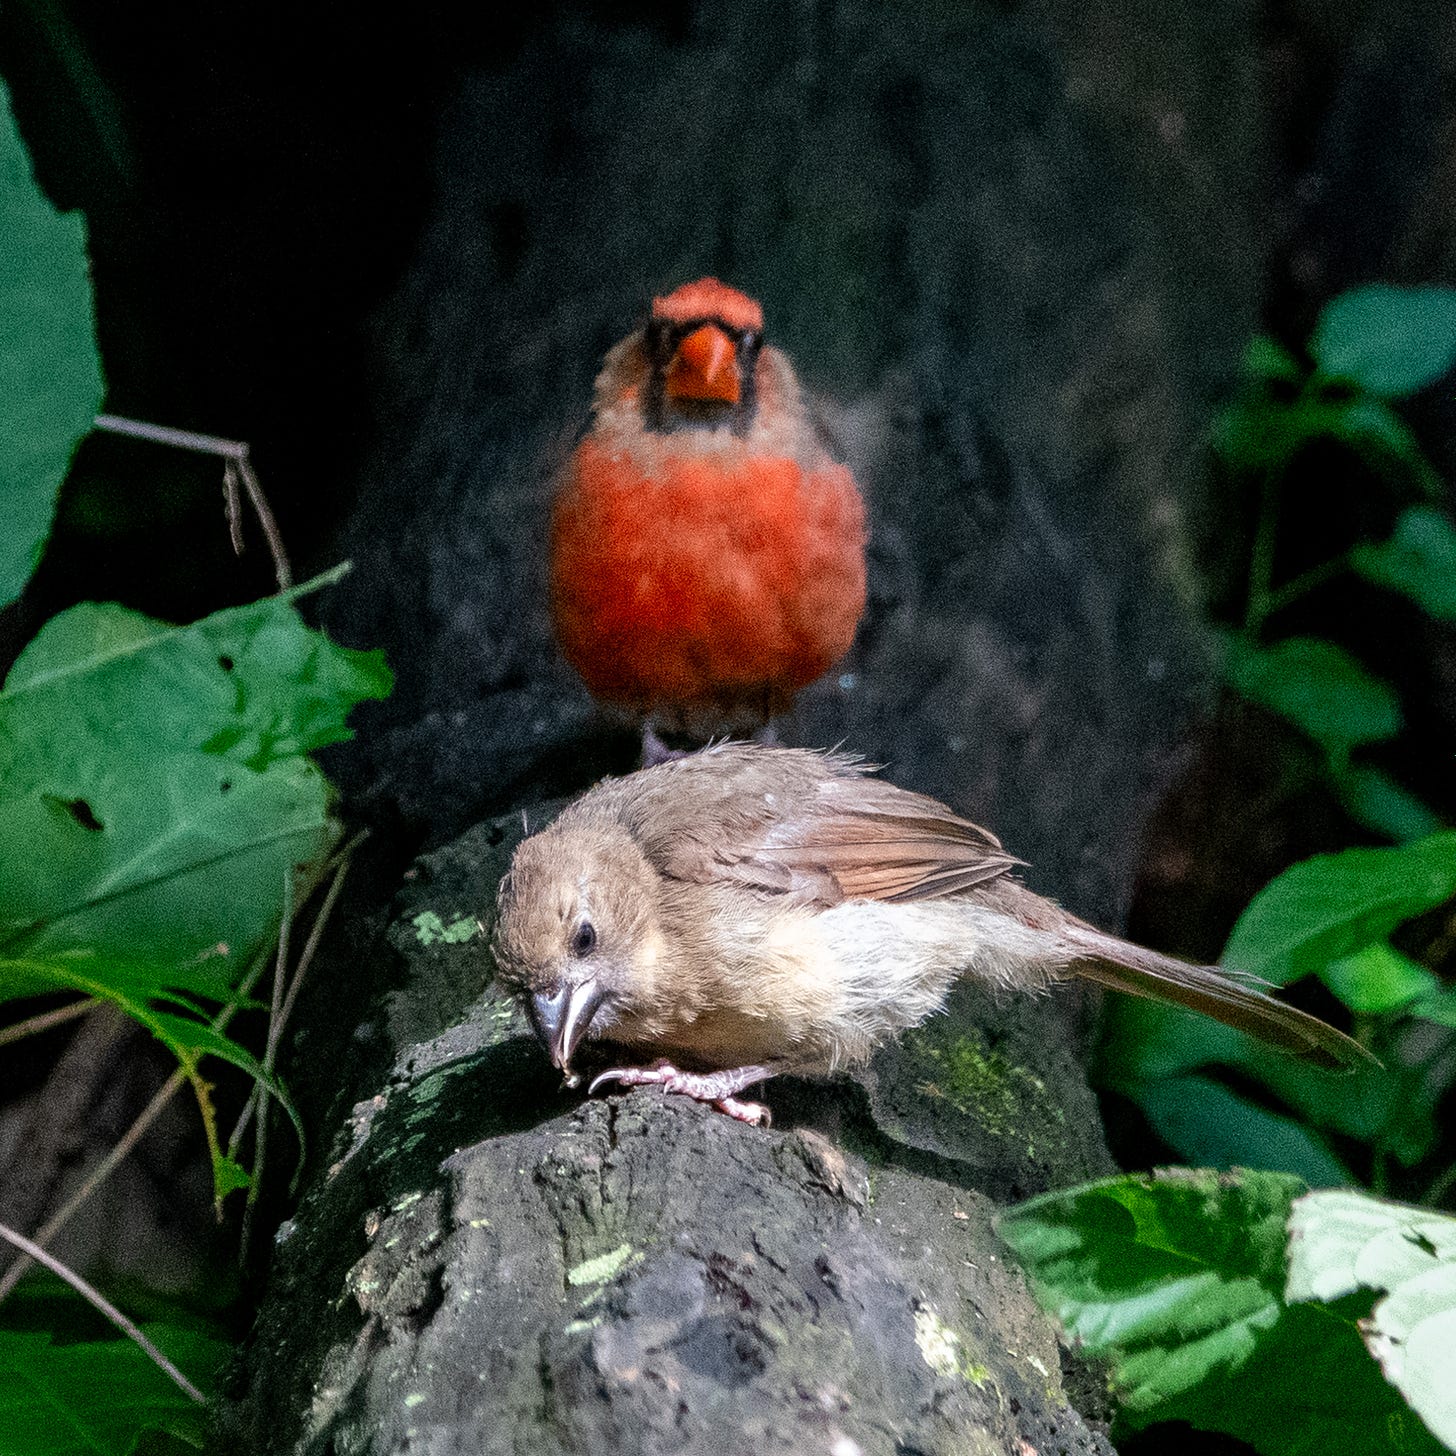 A Northern cardinal fledgling feeds on a fallen log, under its father's close supervision